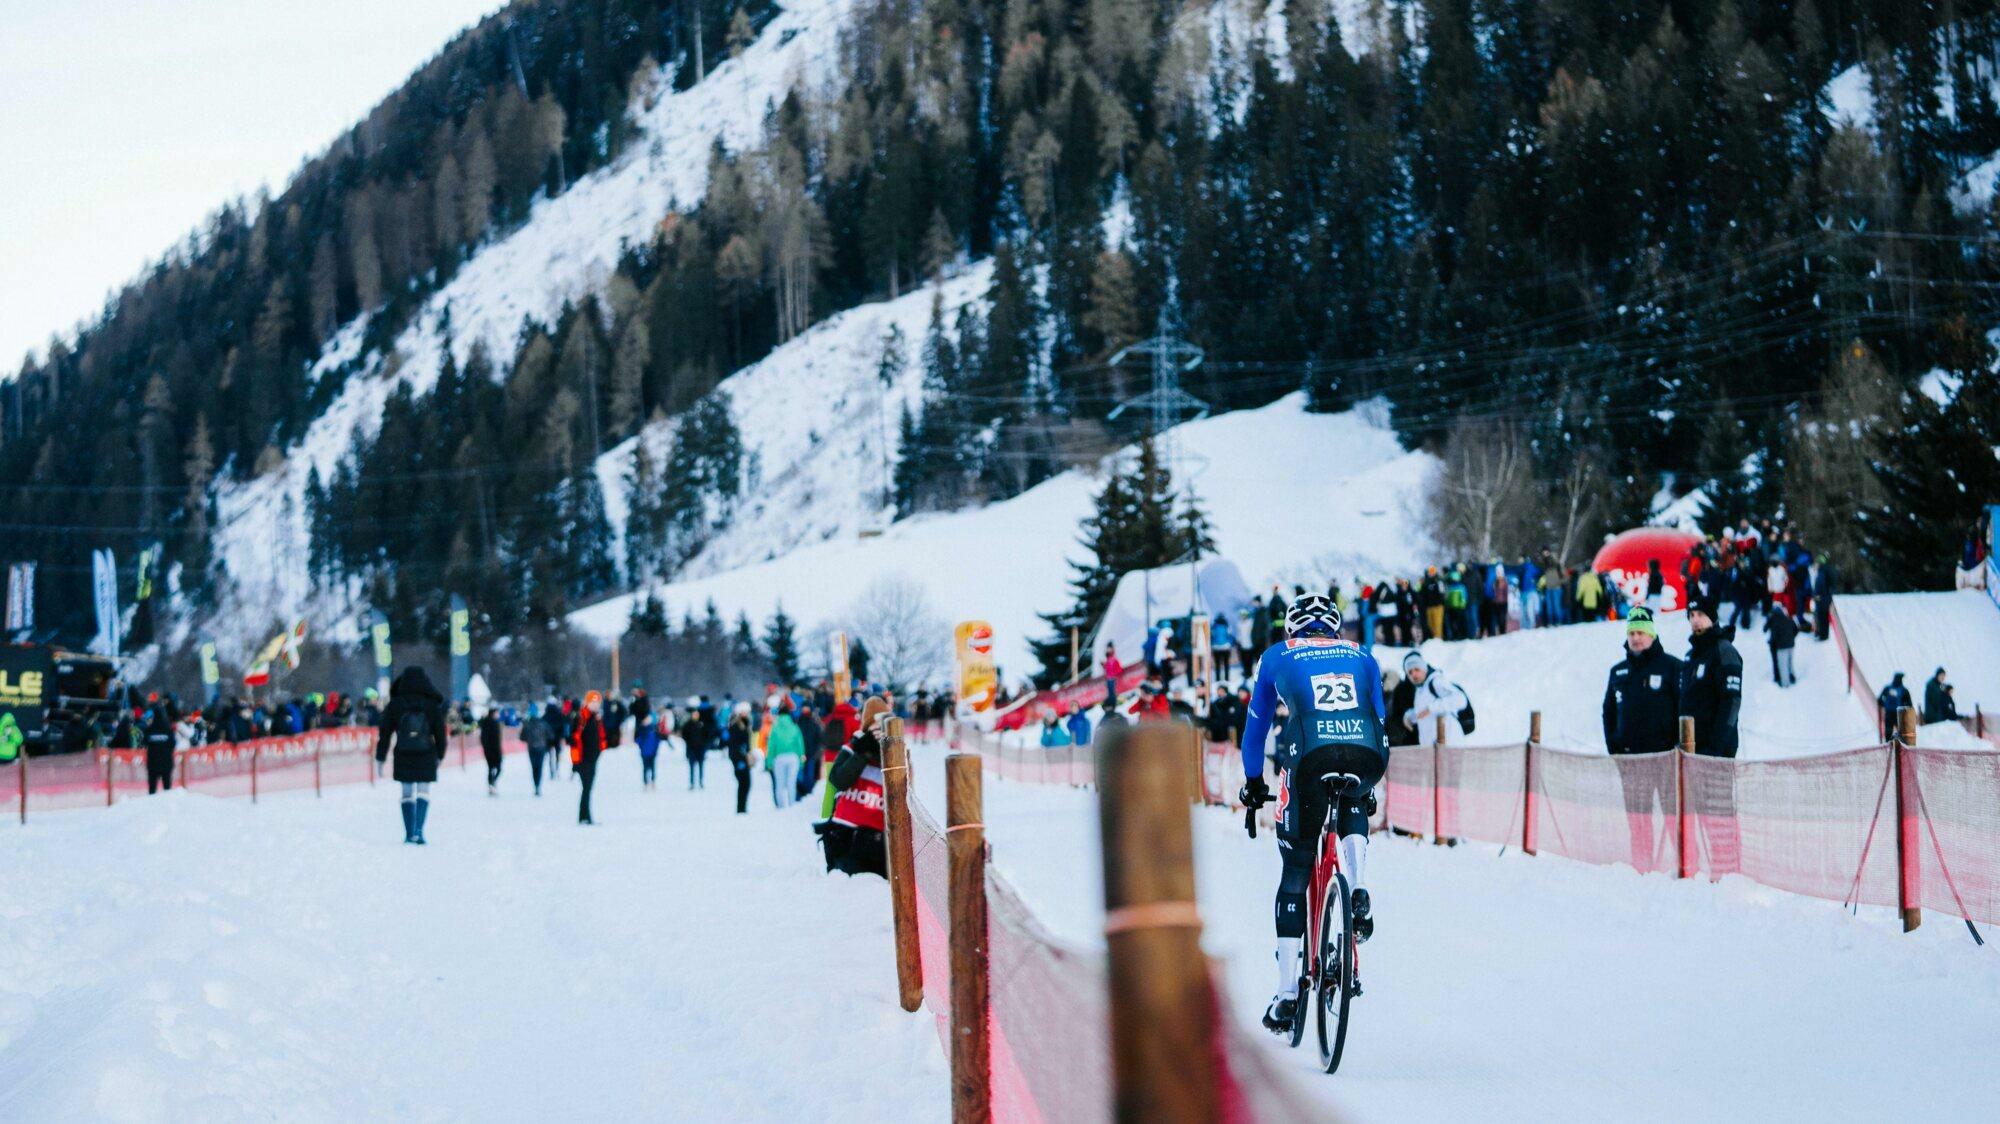 This was the second UCI World Cup in Val Di Sole